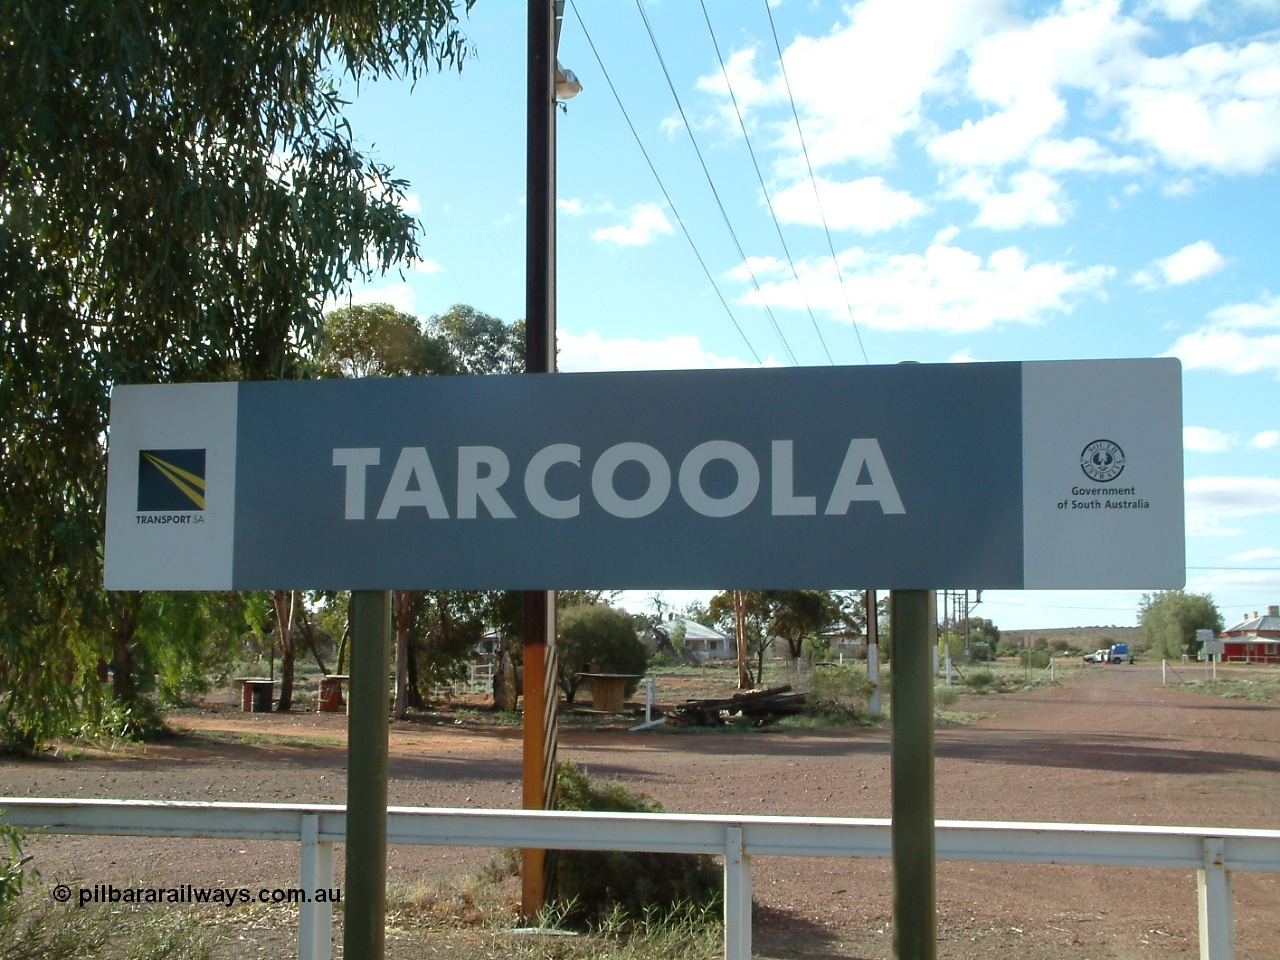 030415 160210
Tarcoola, station nameboard new style, the junction for the TAR and CAR railways situated 504.5 km from the 0 km datum at Coonamia. [url=https://goo.gl/maps/DzchvdNNNo8JobbC8]GeoData location[/url]. 15th April 2003.
